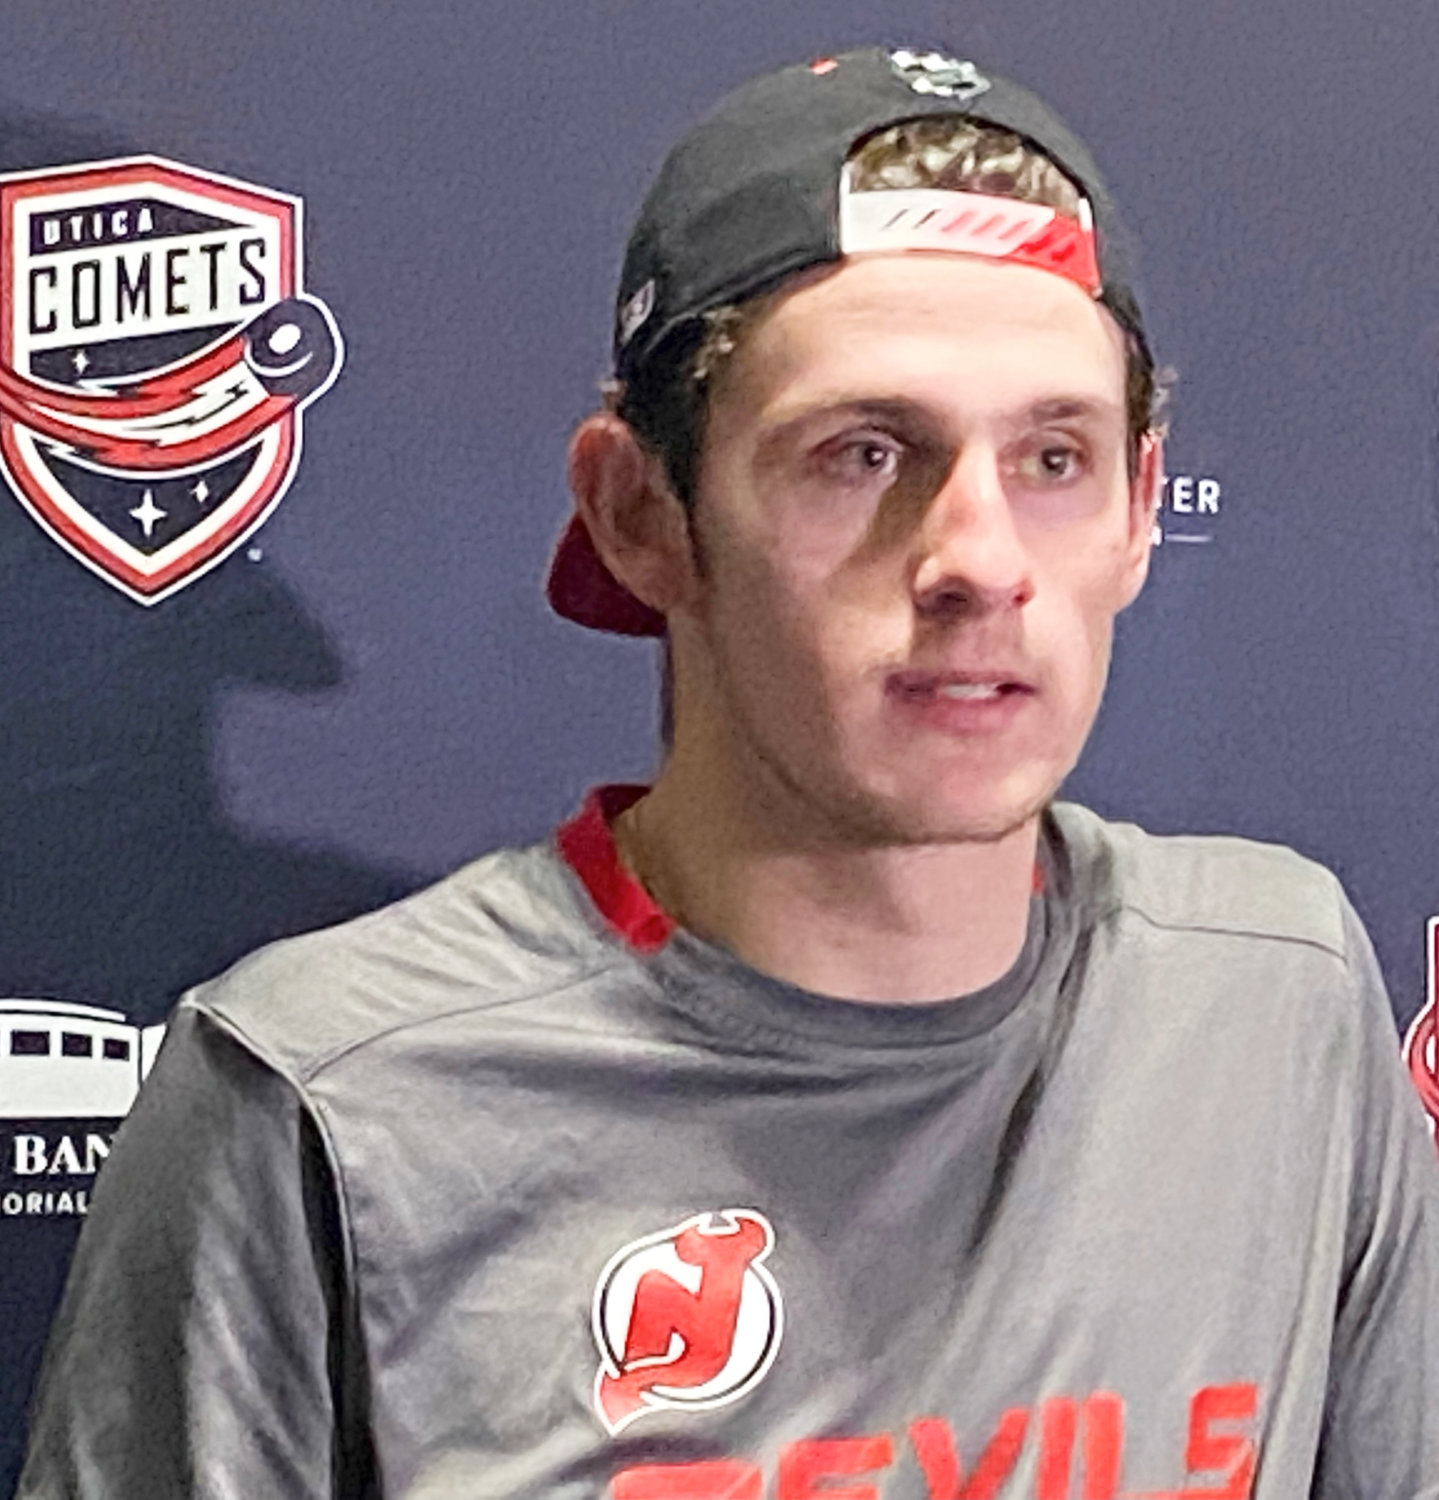 Nolan Foote has four points in his last three games as he's developed chemistry with fellow forward Brian Pinho. Foote, who is in his third pro season, is looking to build on his career-best 32 points last season. He also appeared in seven games with the parent New Jersey Devils last season.